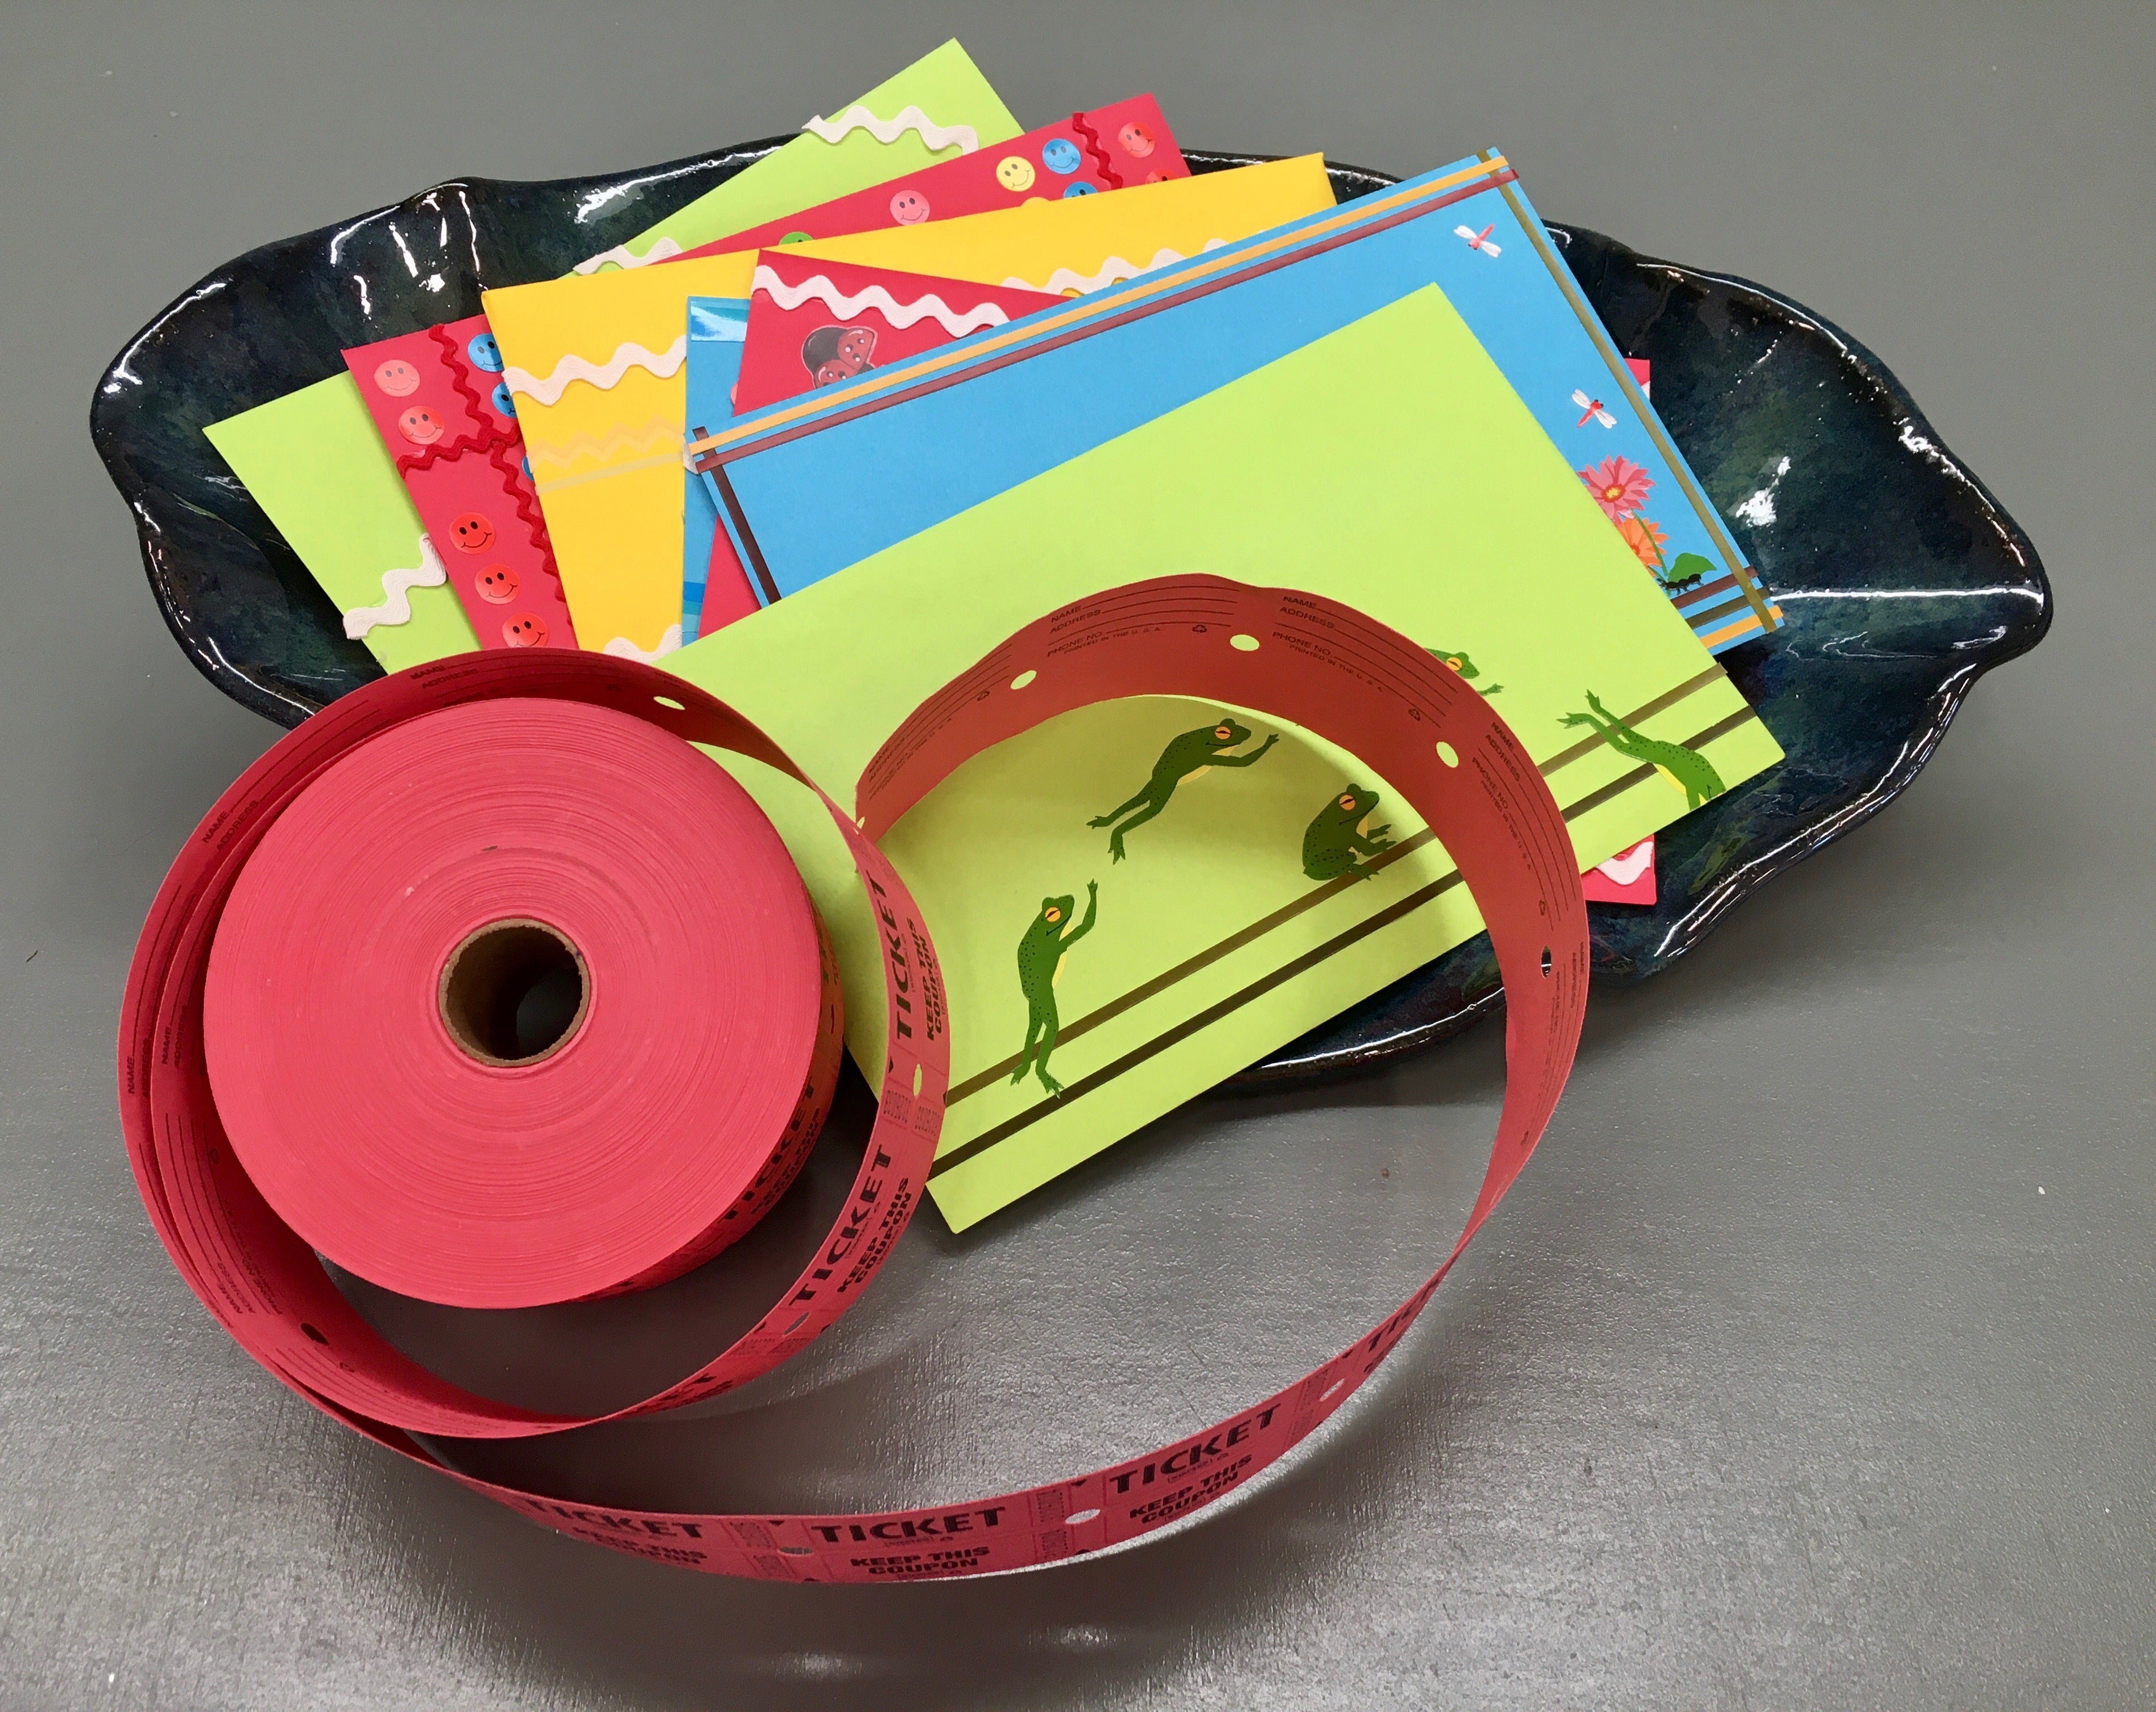 a scallop shaped ceramic bowl full of colorful envelopes and a spool of red raffle tickets